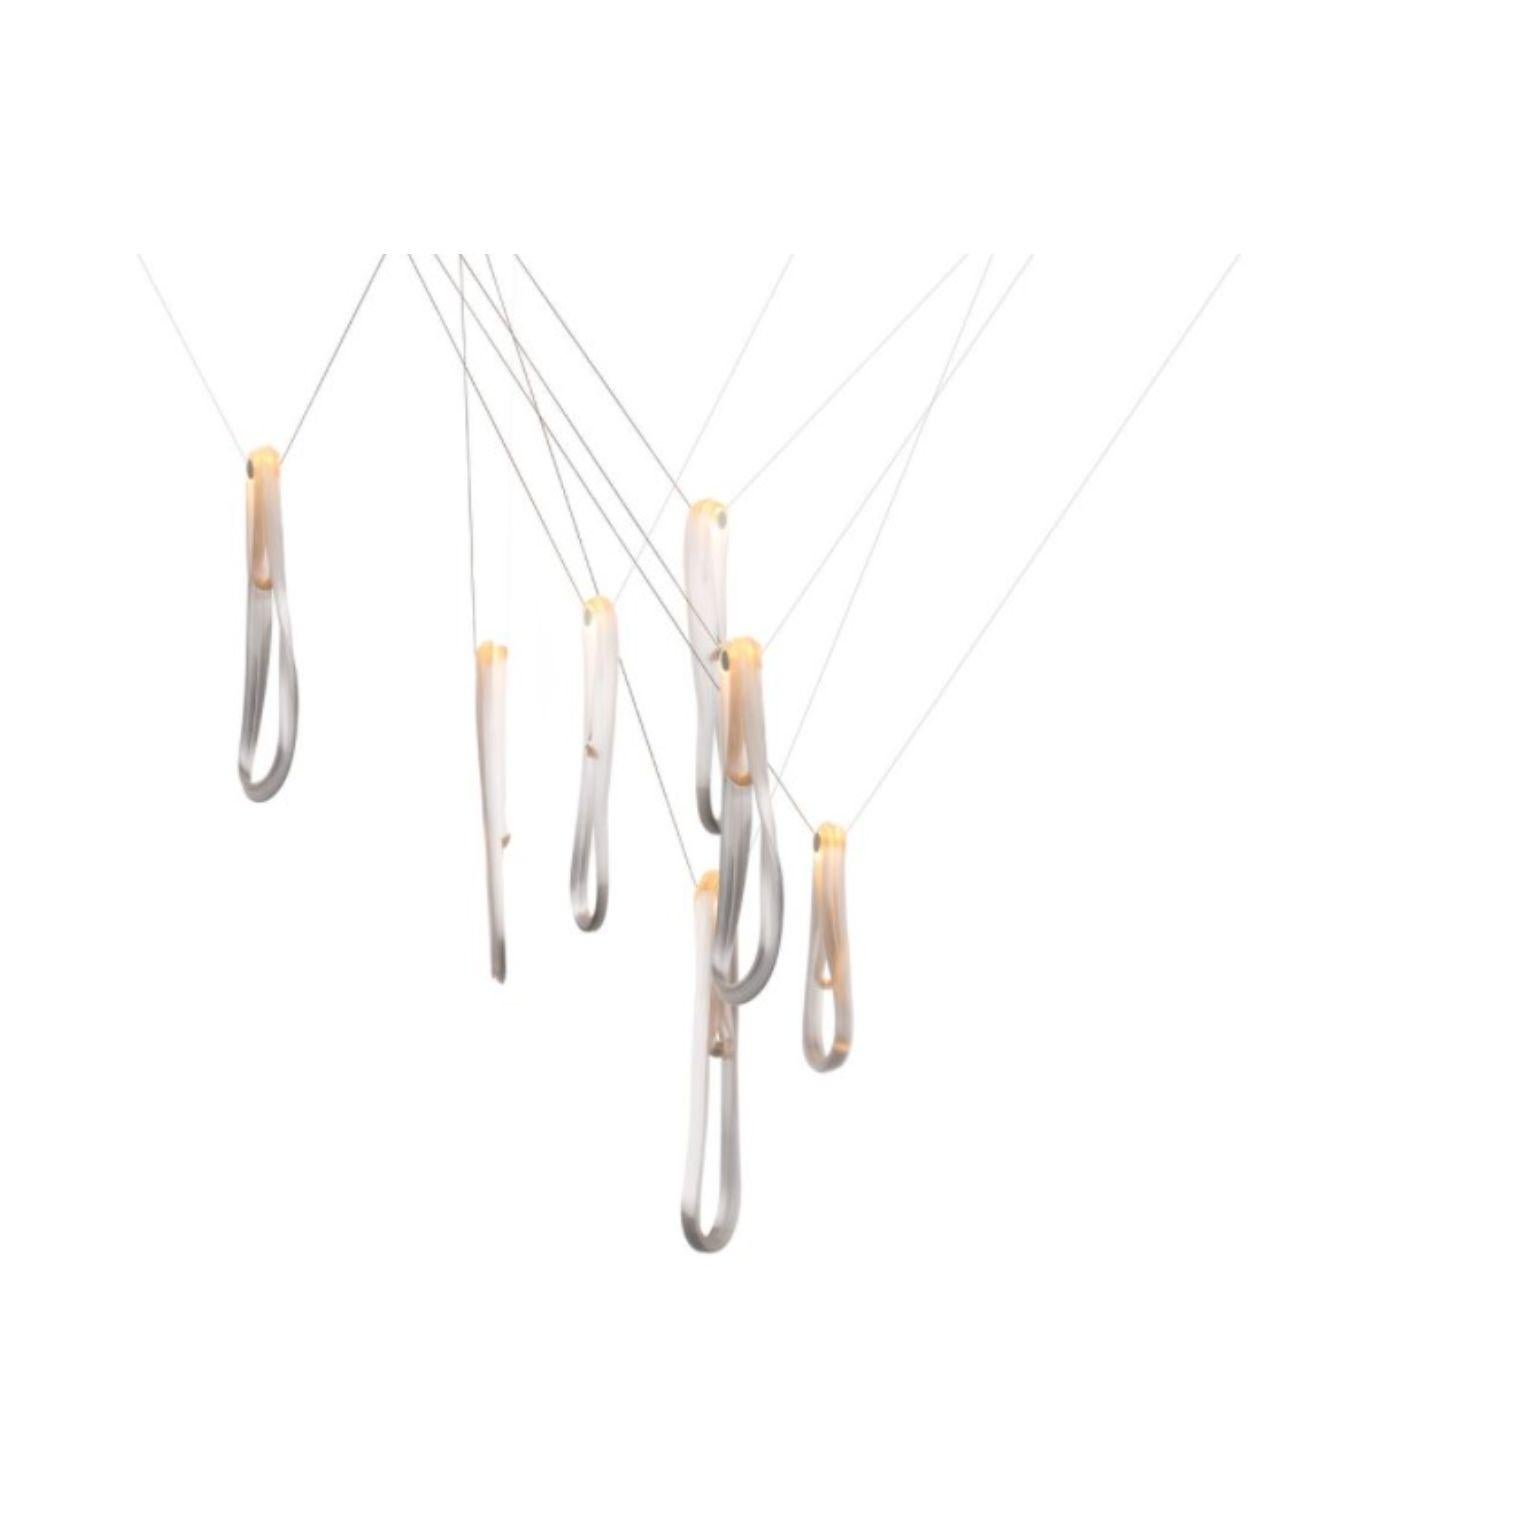 87.7 Pendant by Bocci.
Dimensions: D 20.3 x H 300 cm
Materials: brushed nickel round canopy
Weight: 9.5 kg
Also available in different dimensions.

All our lamps can be wired according to each country. If sold to the USA it will be wired for